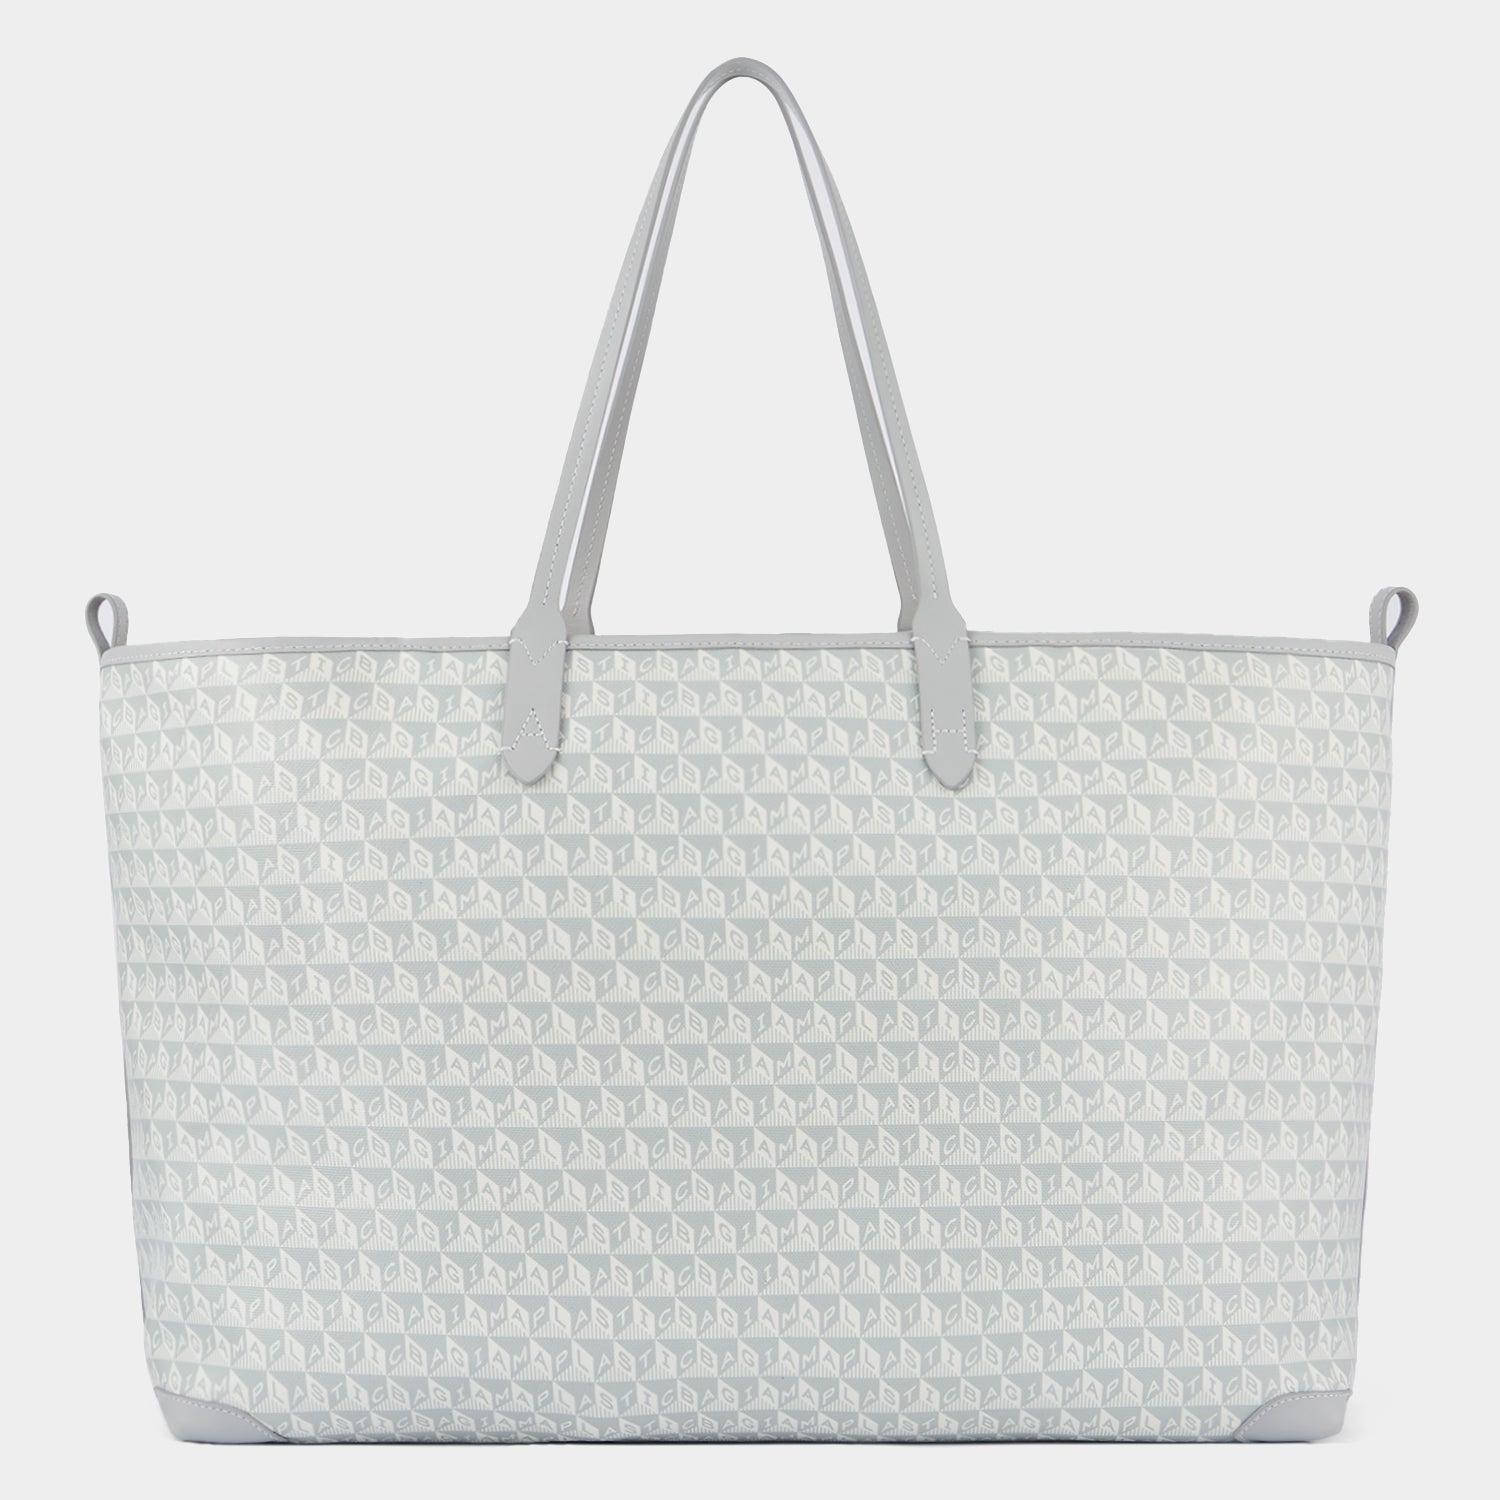 I am a Plastic Bag Wink XL Tote -

                  
                    Recycled Canvas in Frost -
                  

                  Anya Hindmarch UK
